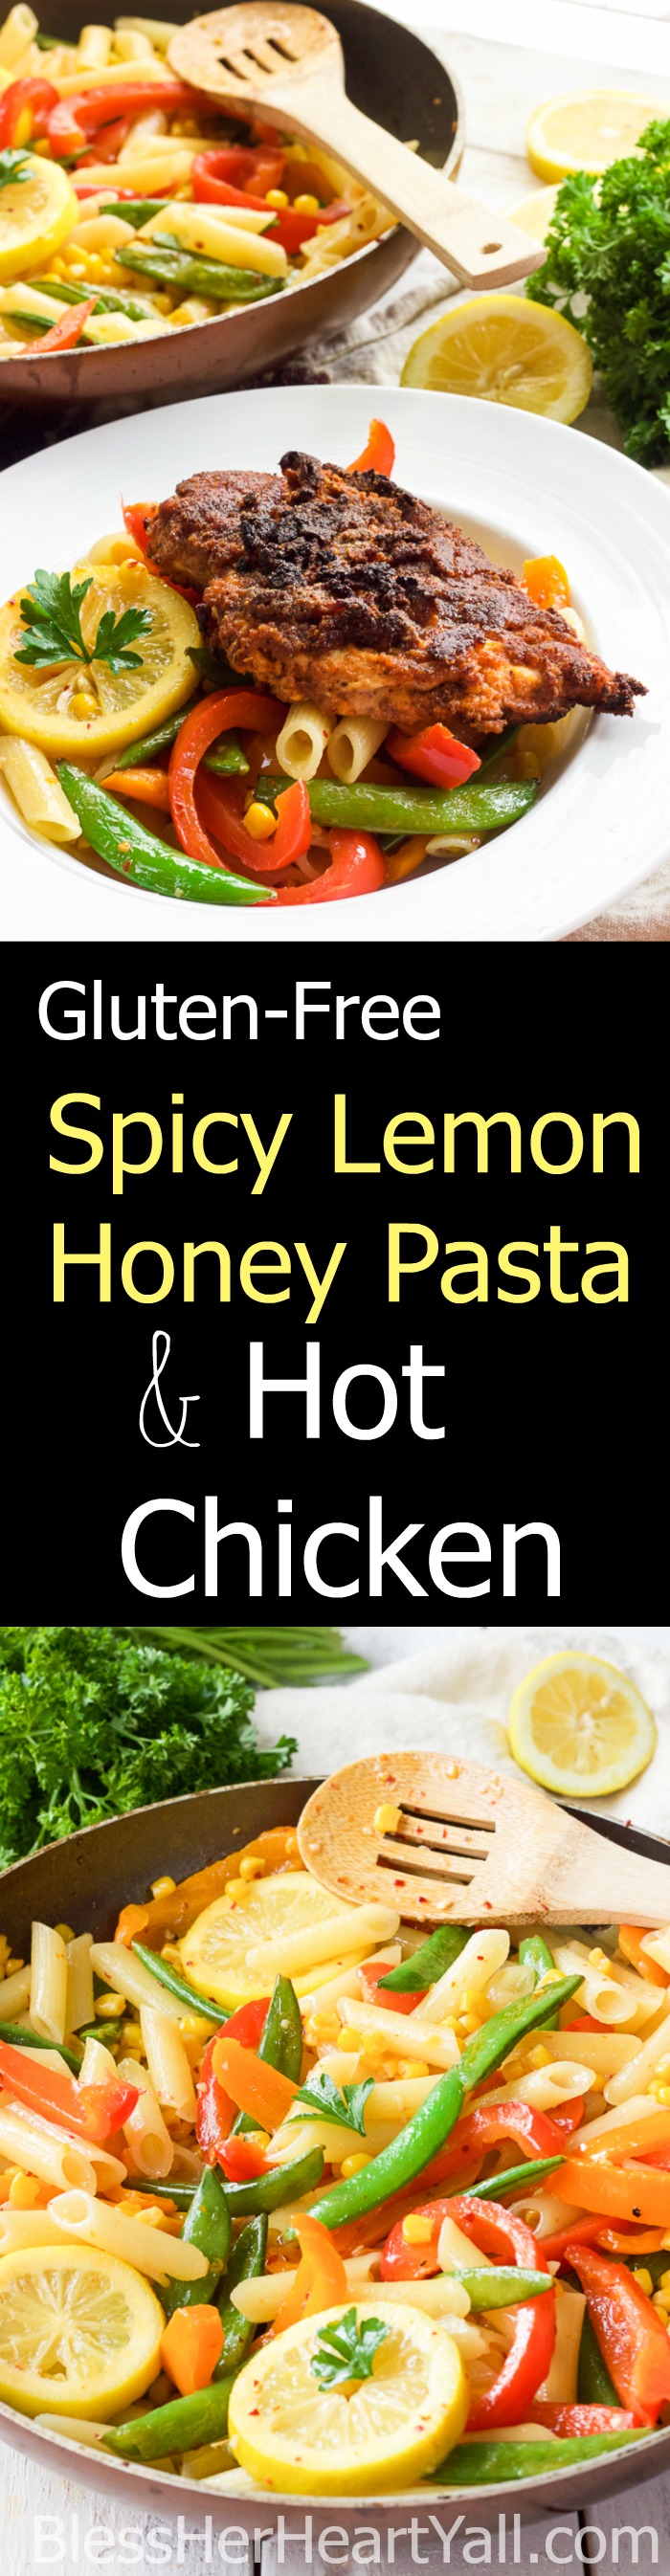 This spicy lemon honey hot chicken pasta dish is an amazing light, sweet and spicy pasta dish, topped with juicy, crispy gluten-free hot chicken, for one delicious meal!